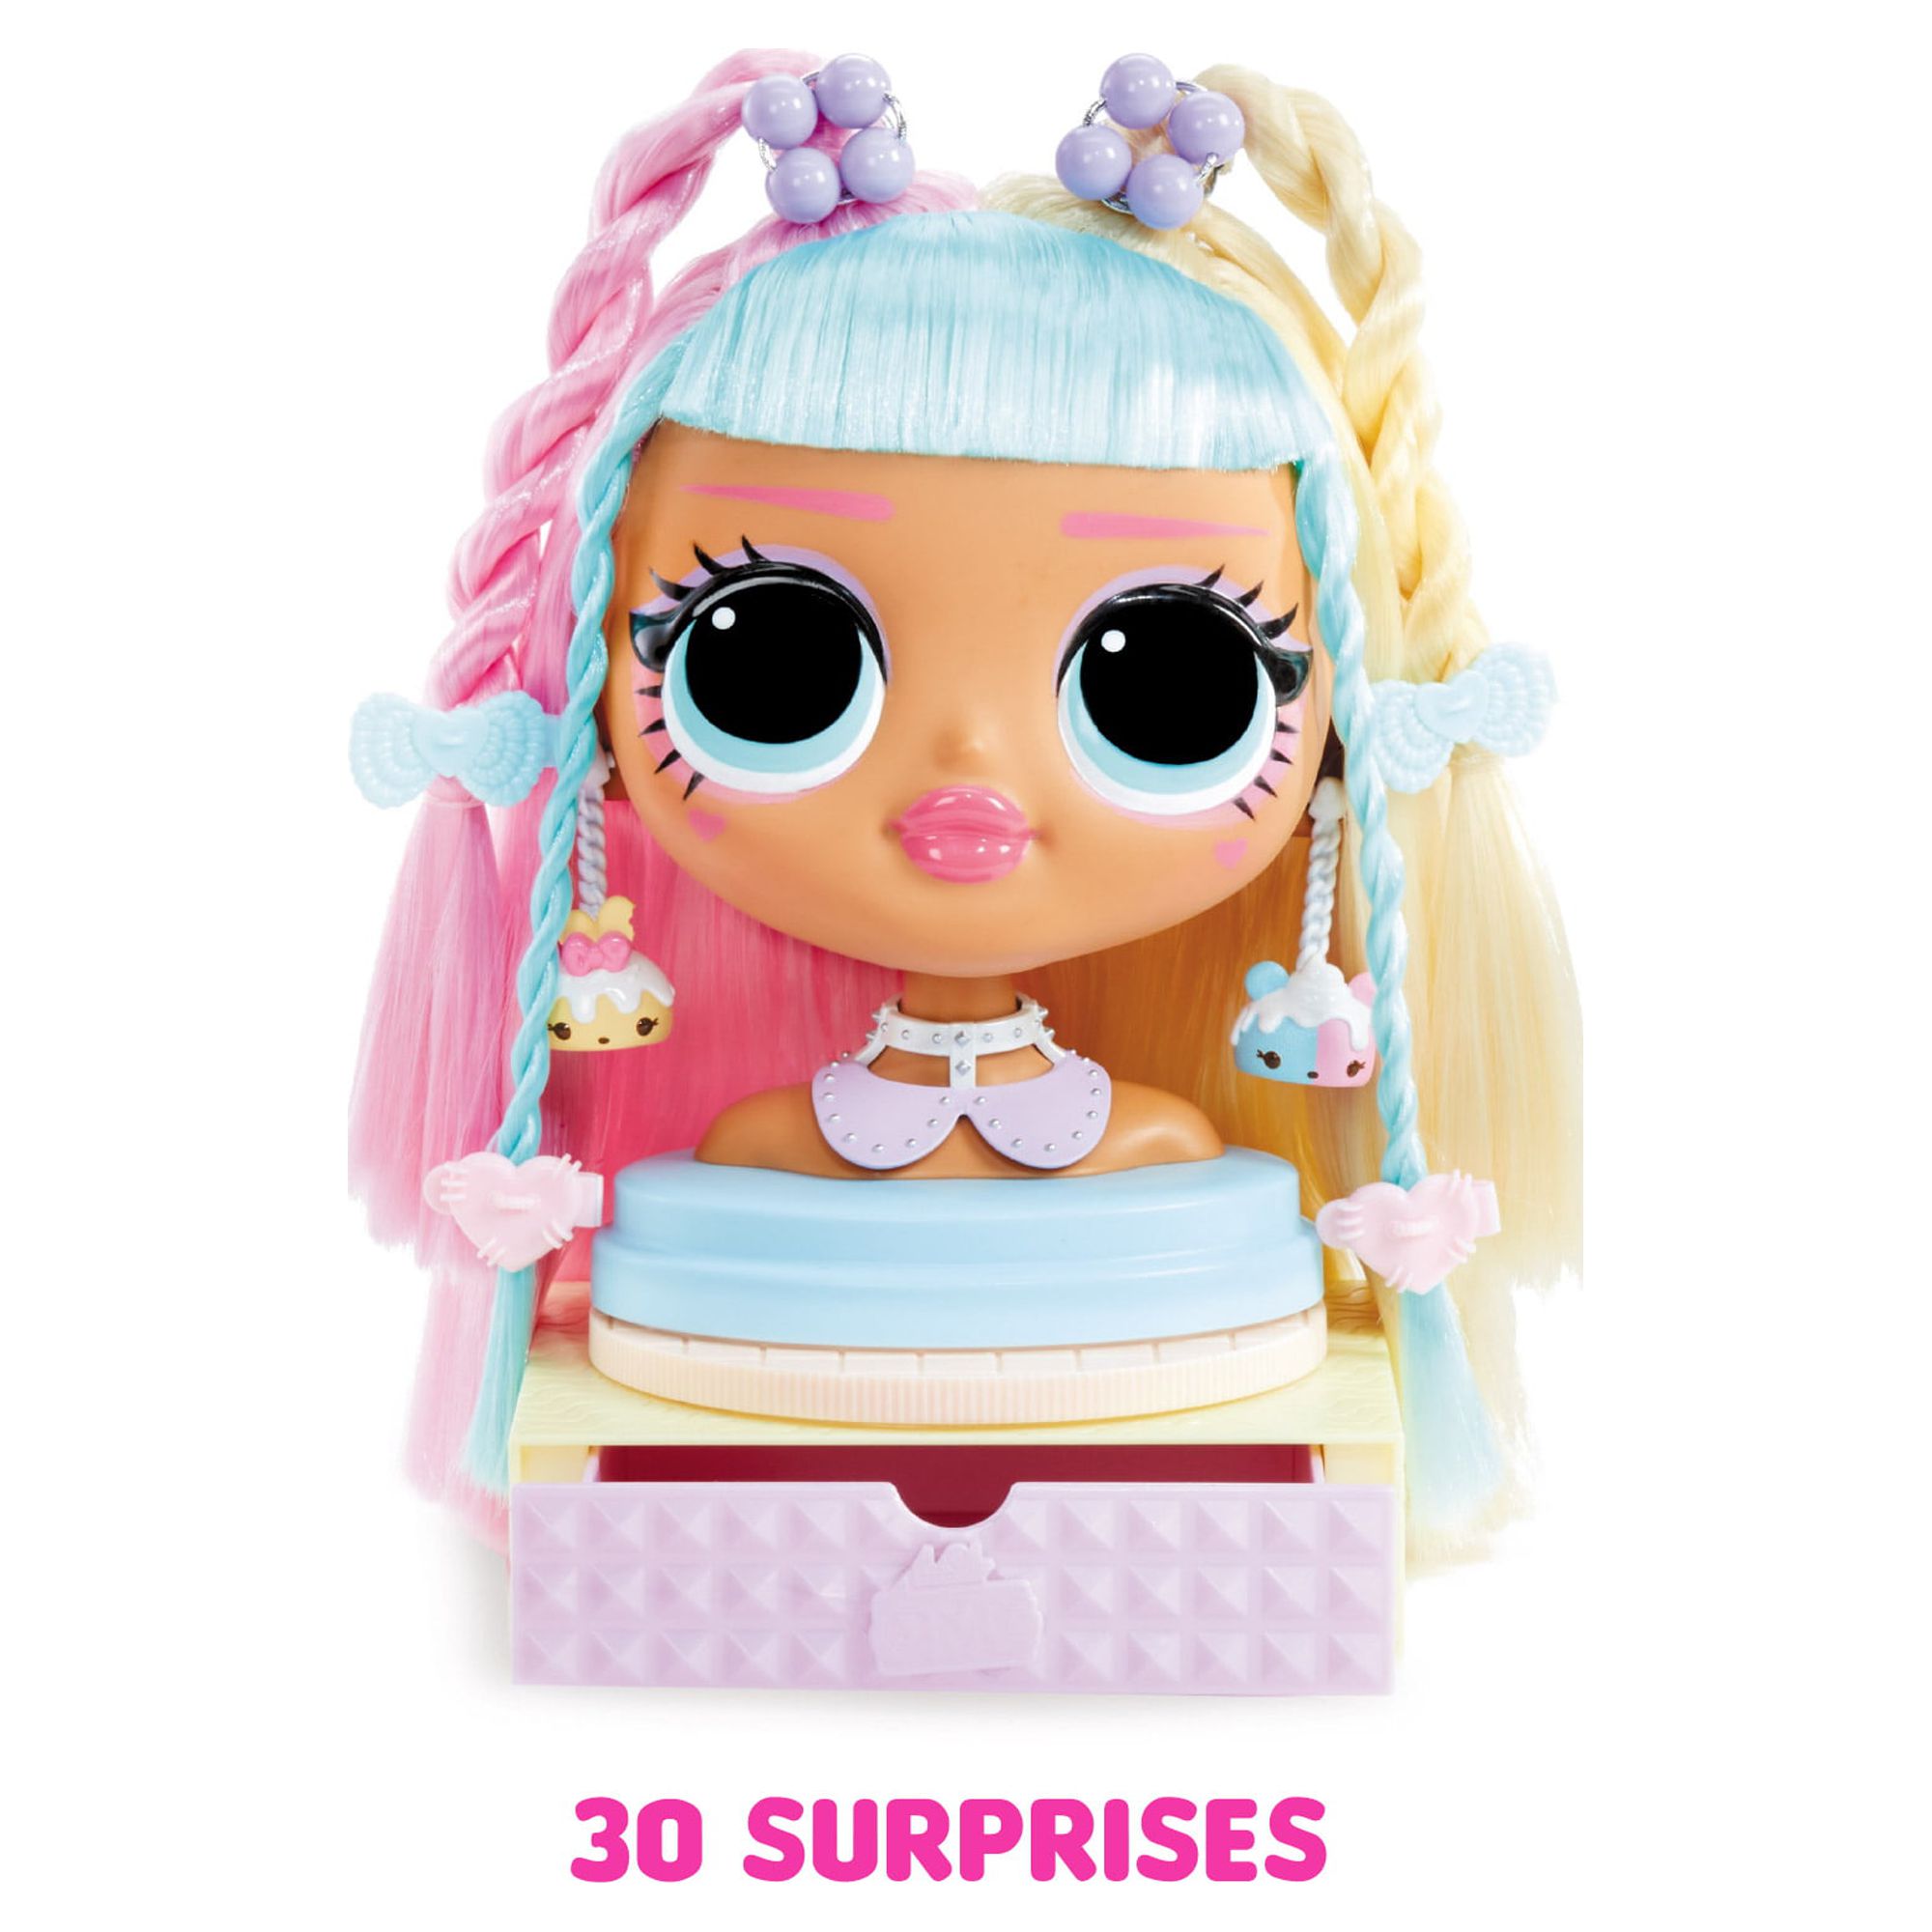 LOL Surprise Omg Styling Doll Head Candylicious With 30 Surprises Girls Hair Play Toy - image 4 of 7